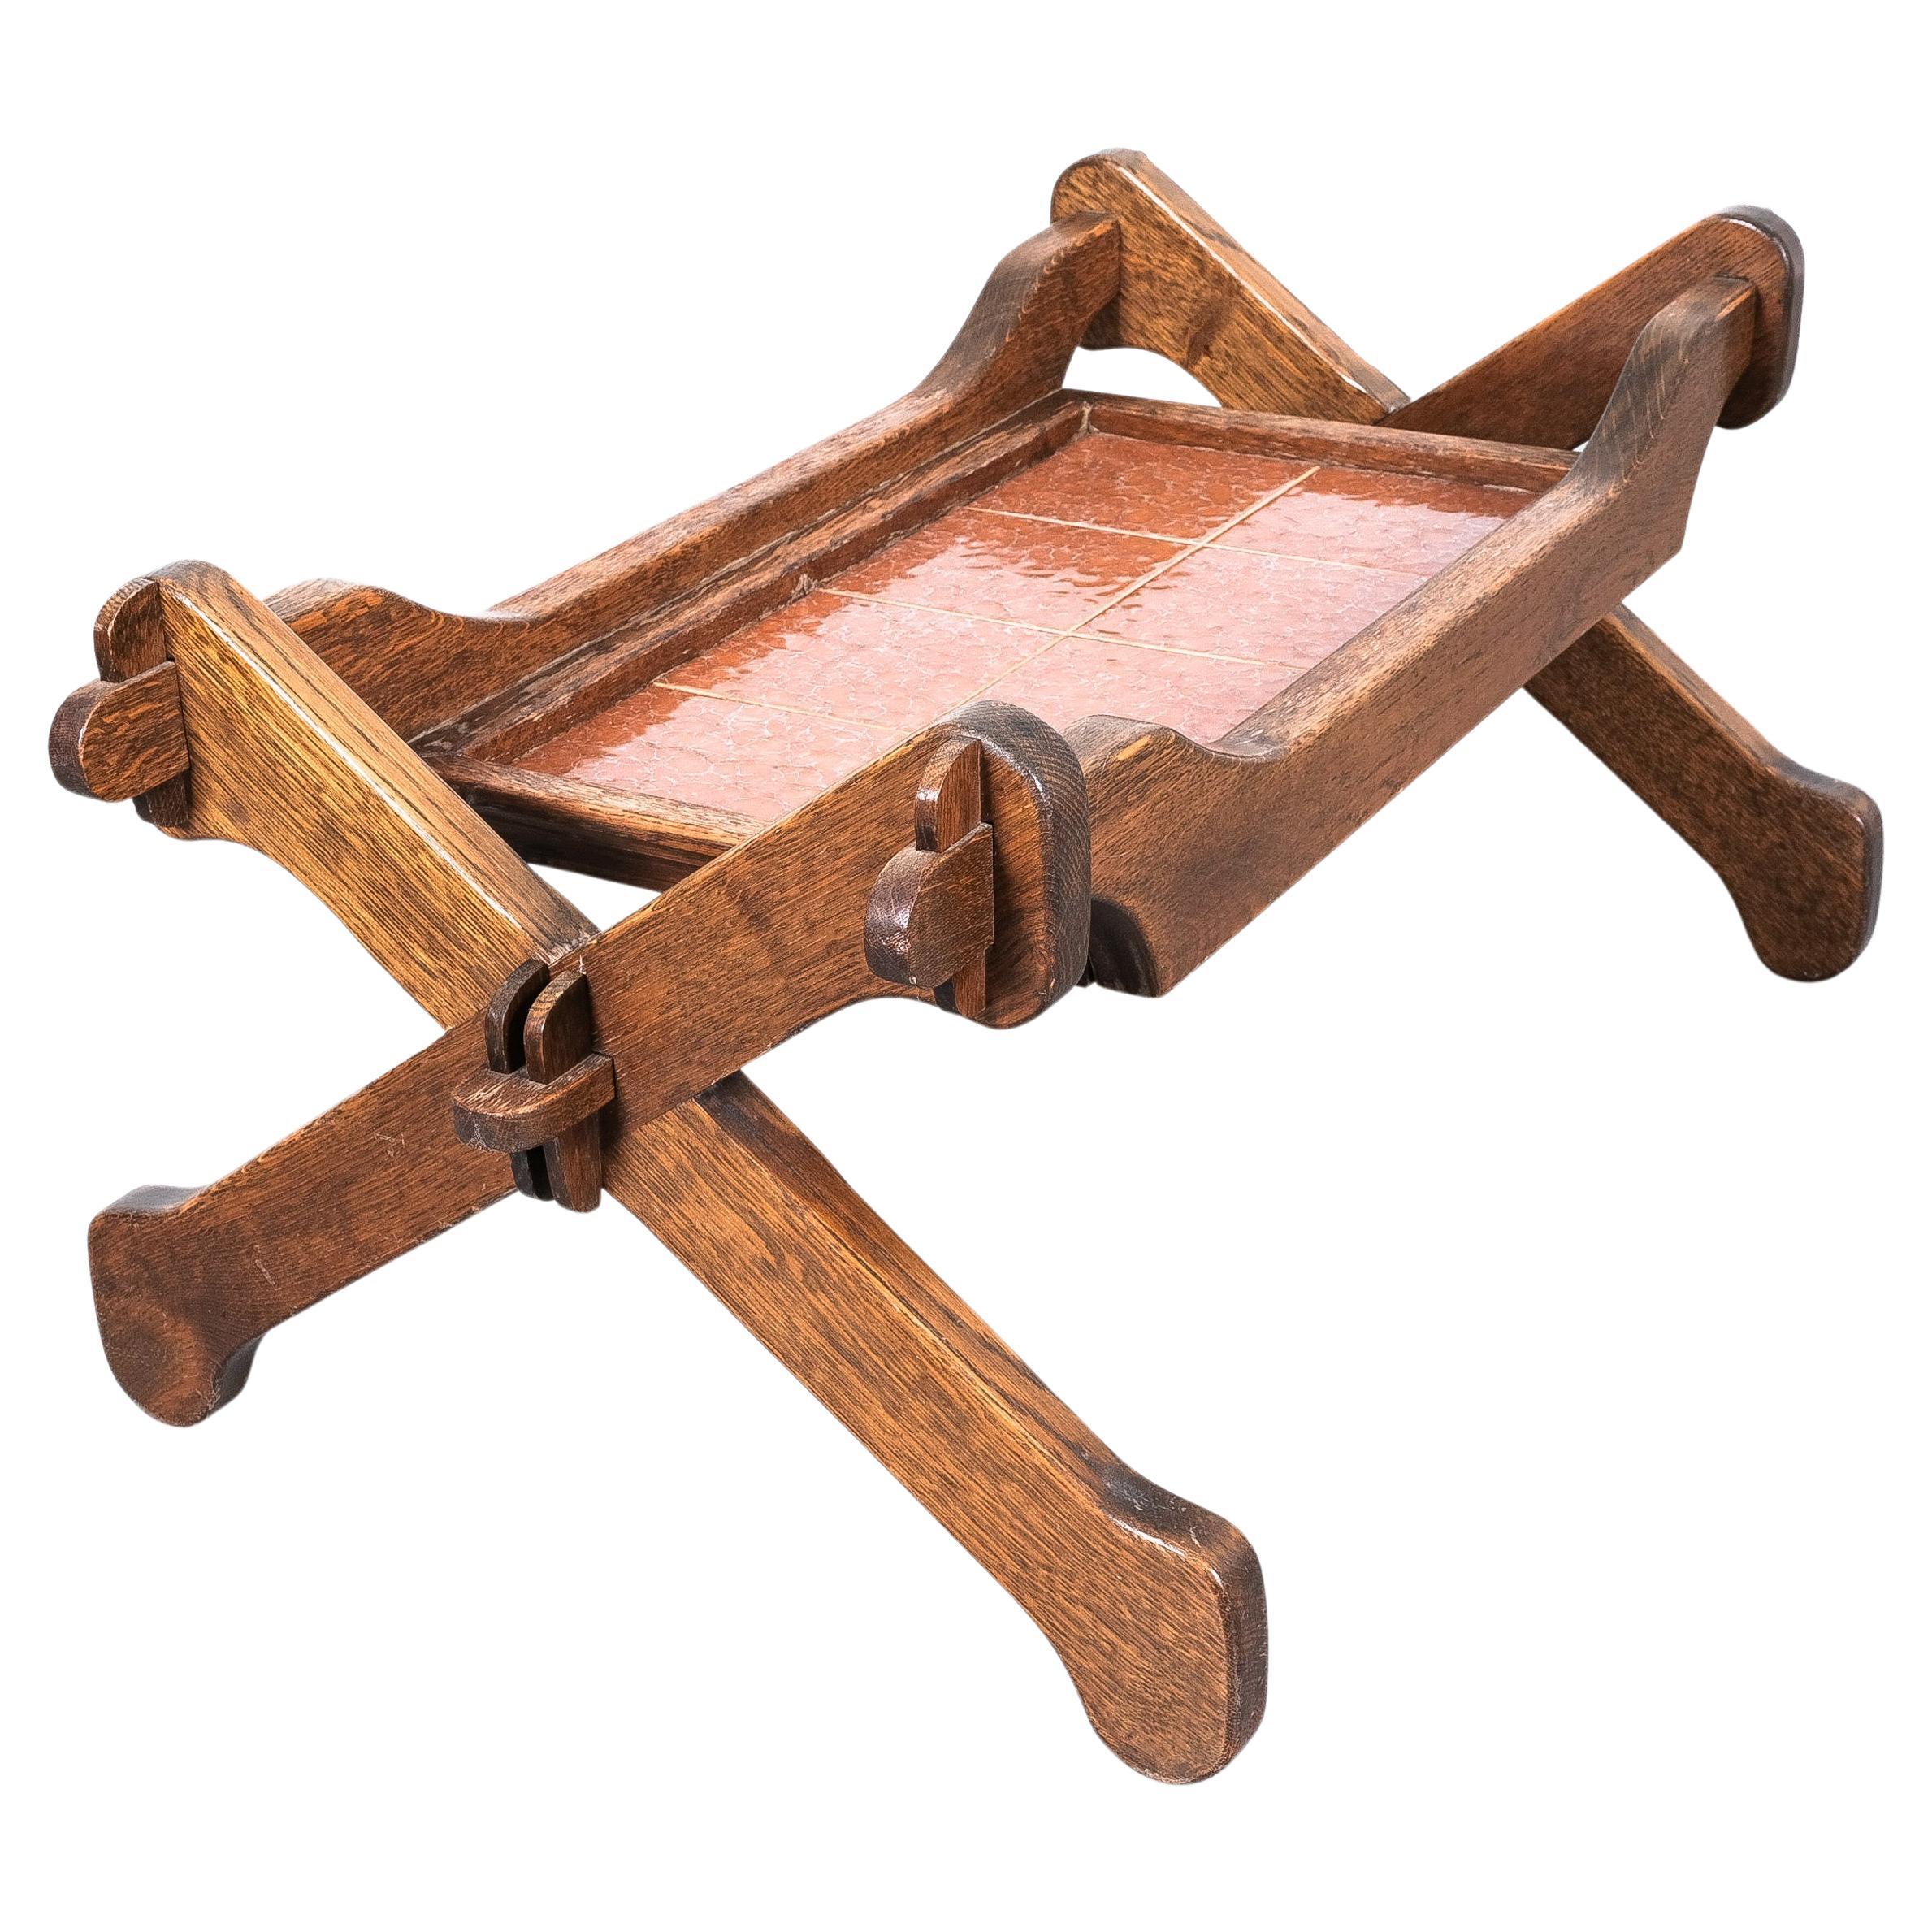 Rustic Bespoke Oak Table with Ceramic Tile Tray, France, 1960 For Sale